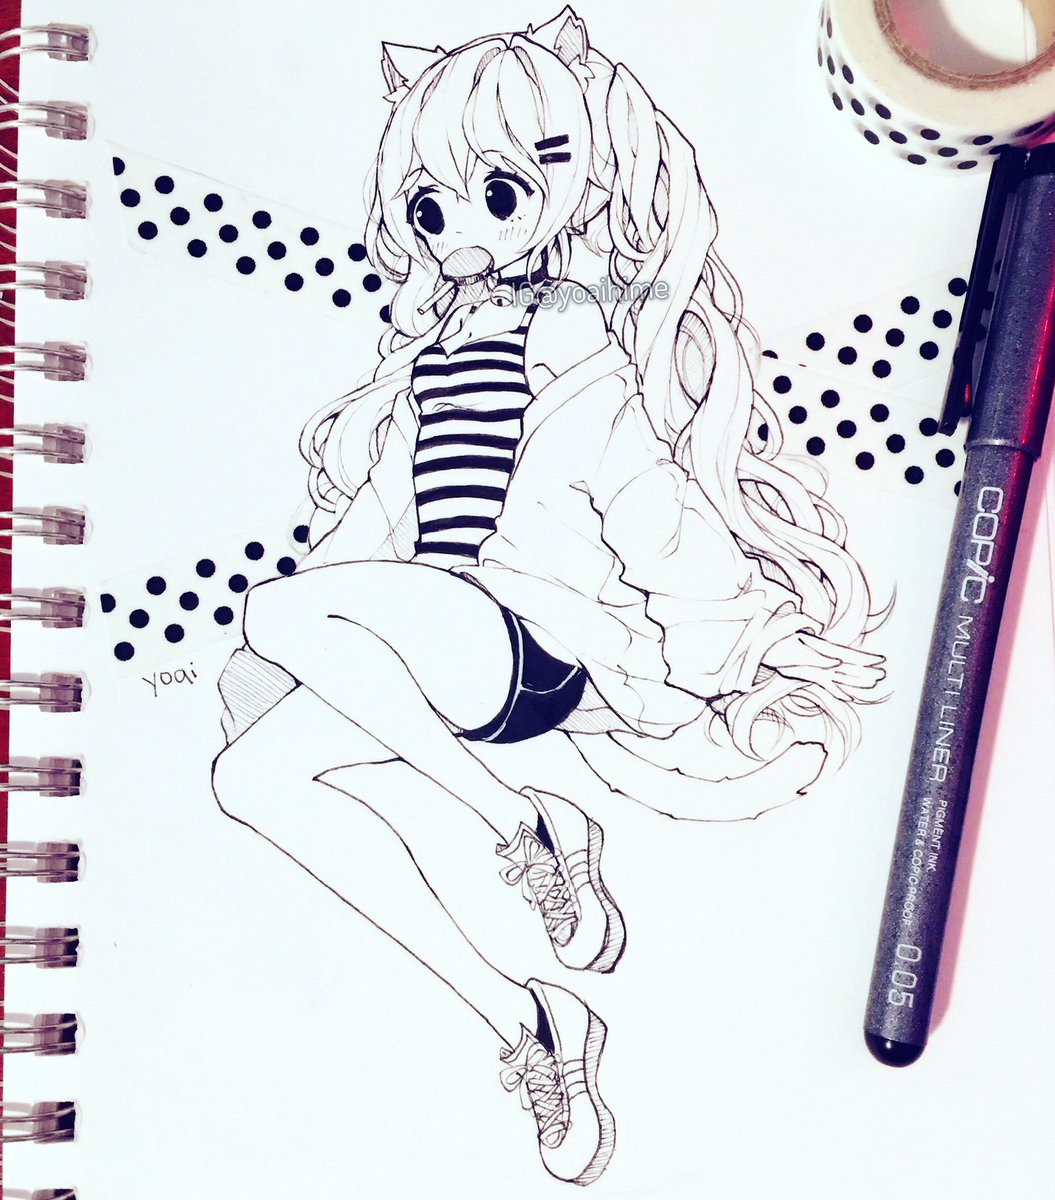 First drawing of 2018 ヽ(*≧ω≦)ノ 